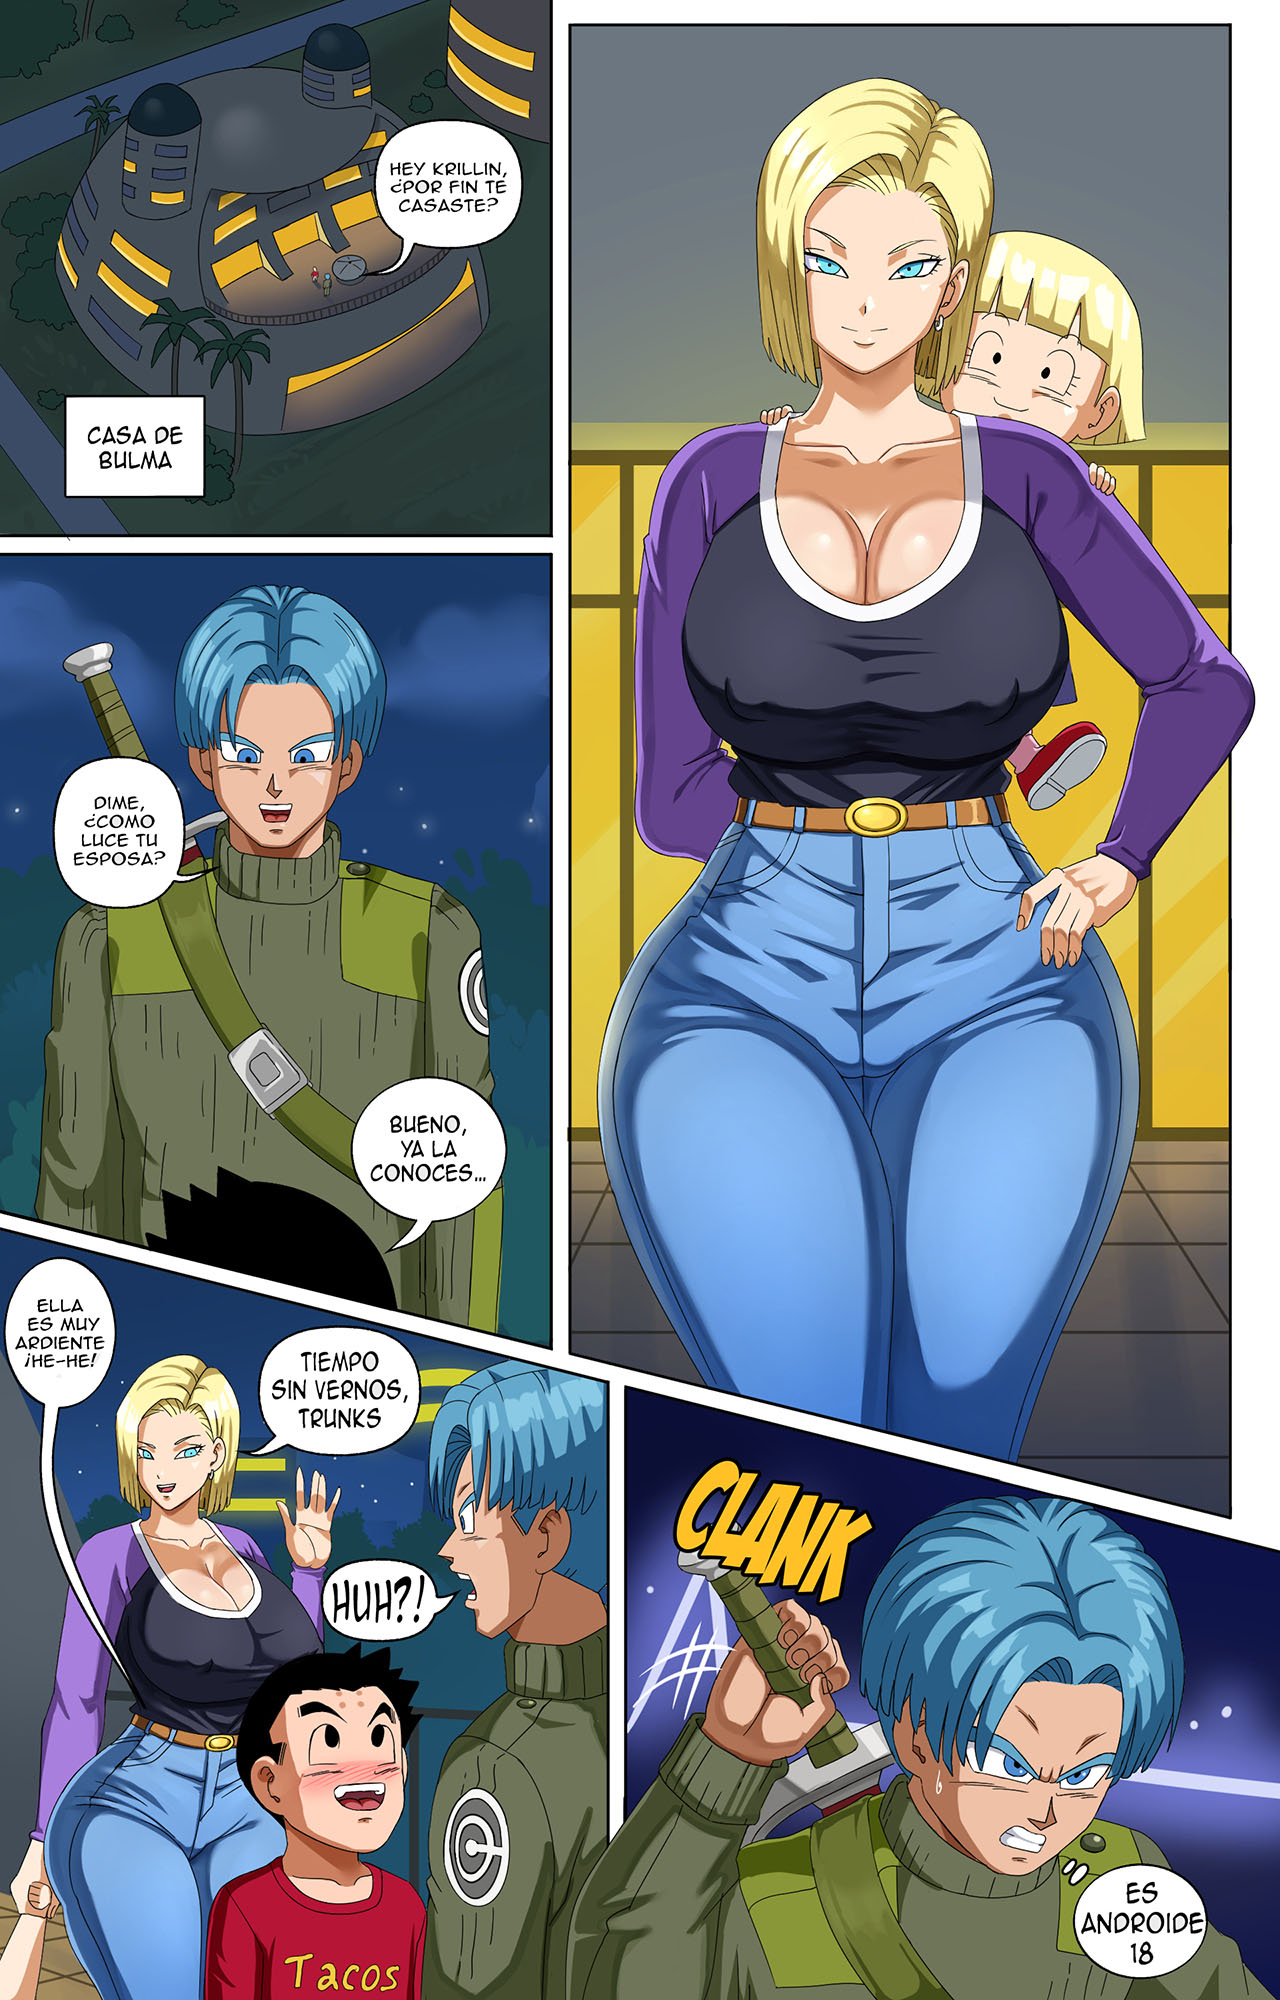 Meeting ANDROID 18 yet again